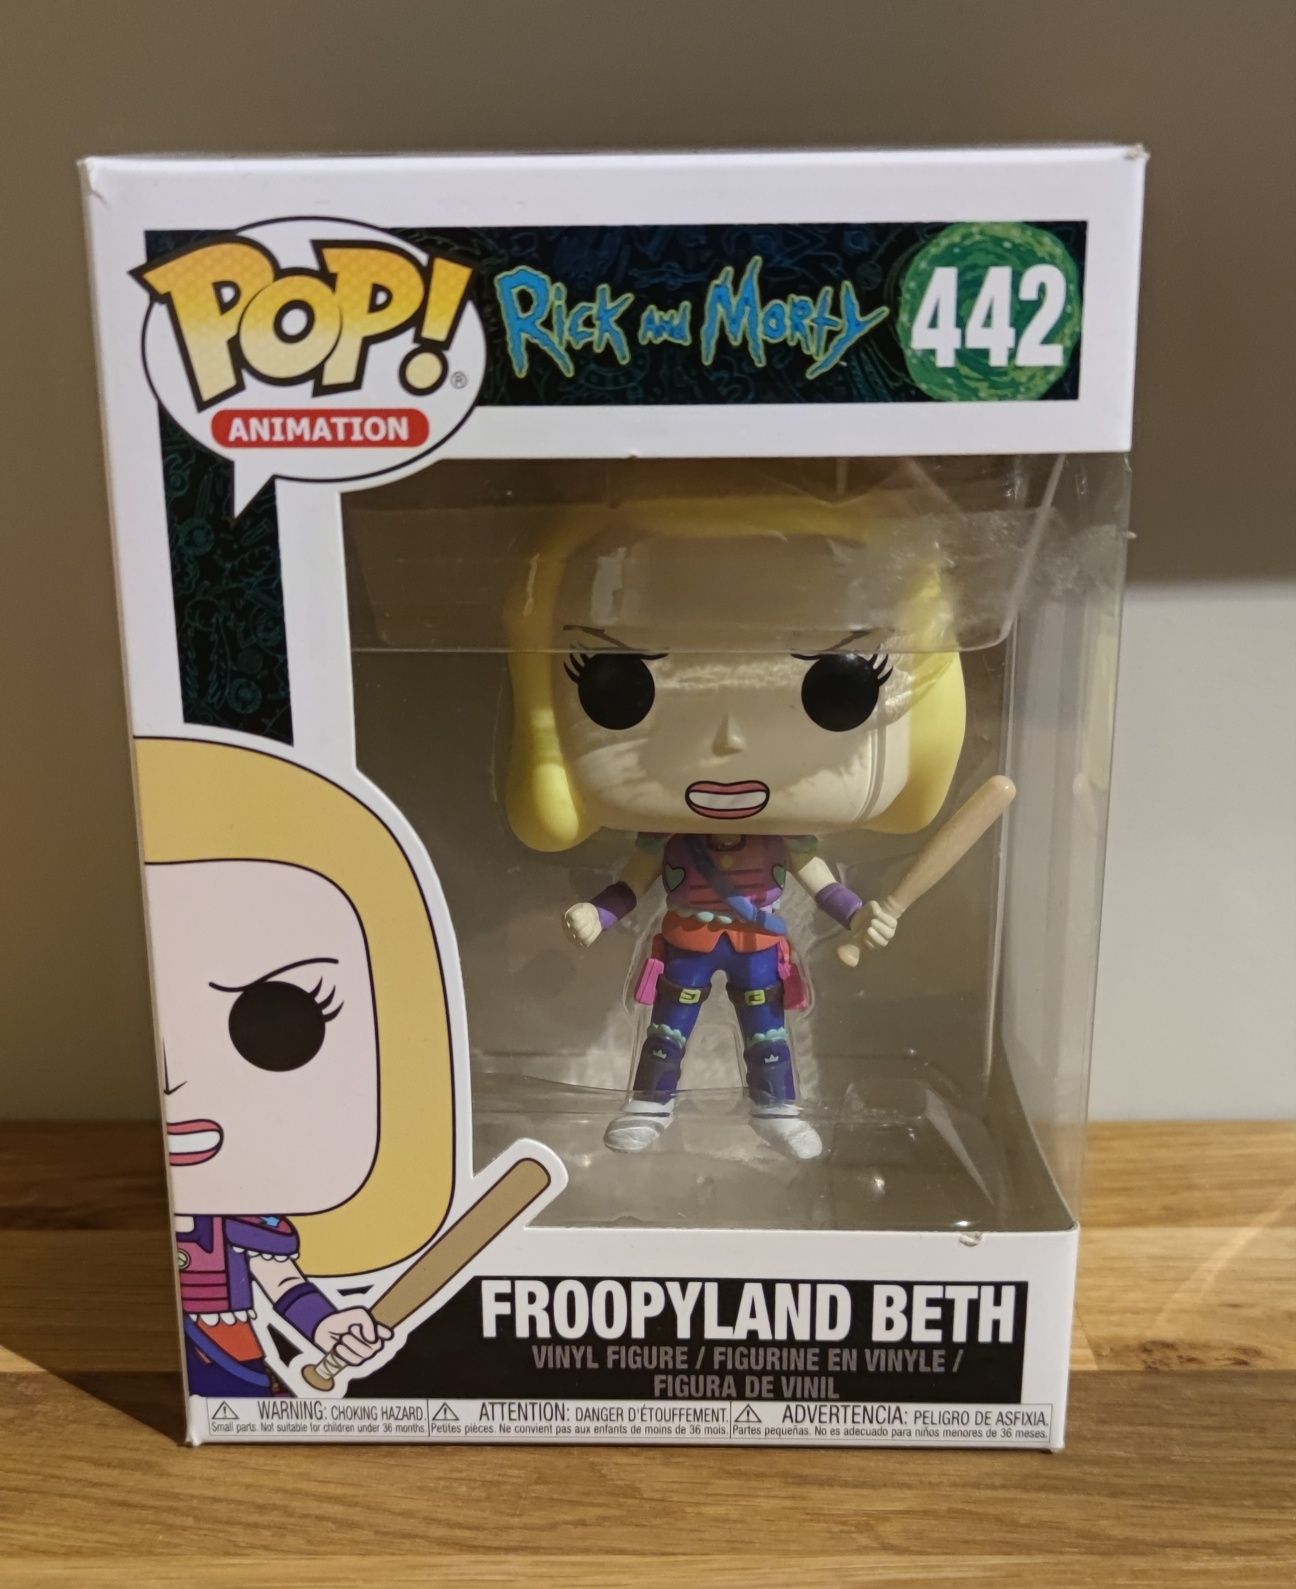 Funko Pop 442 - Rick and Morty - Froopyland Beth